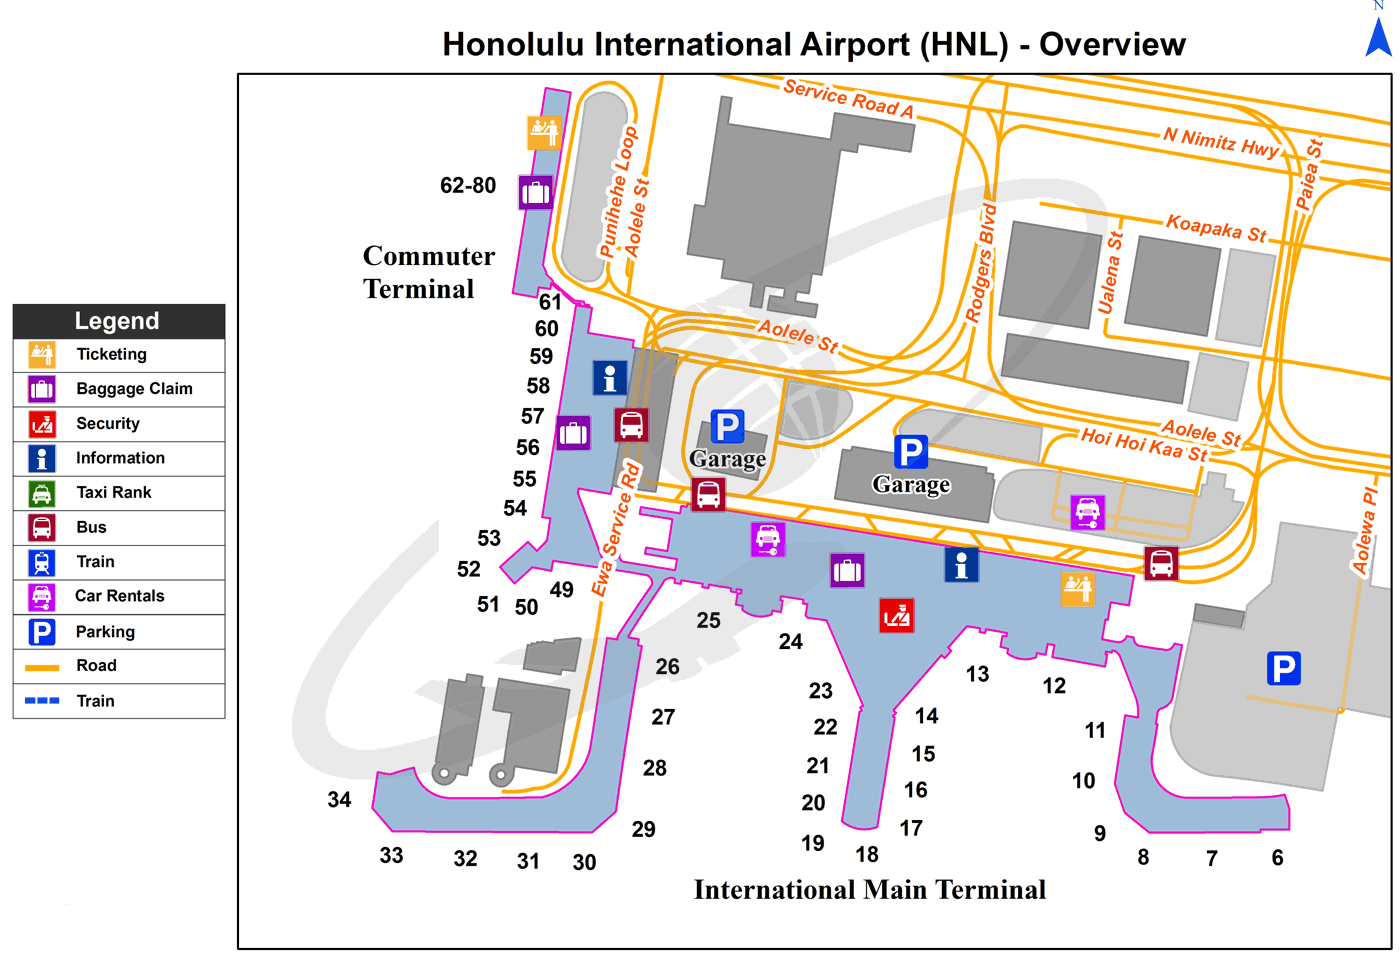 HNL_overview_map